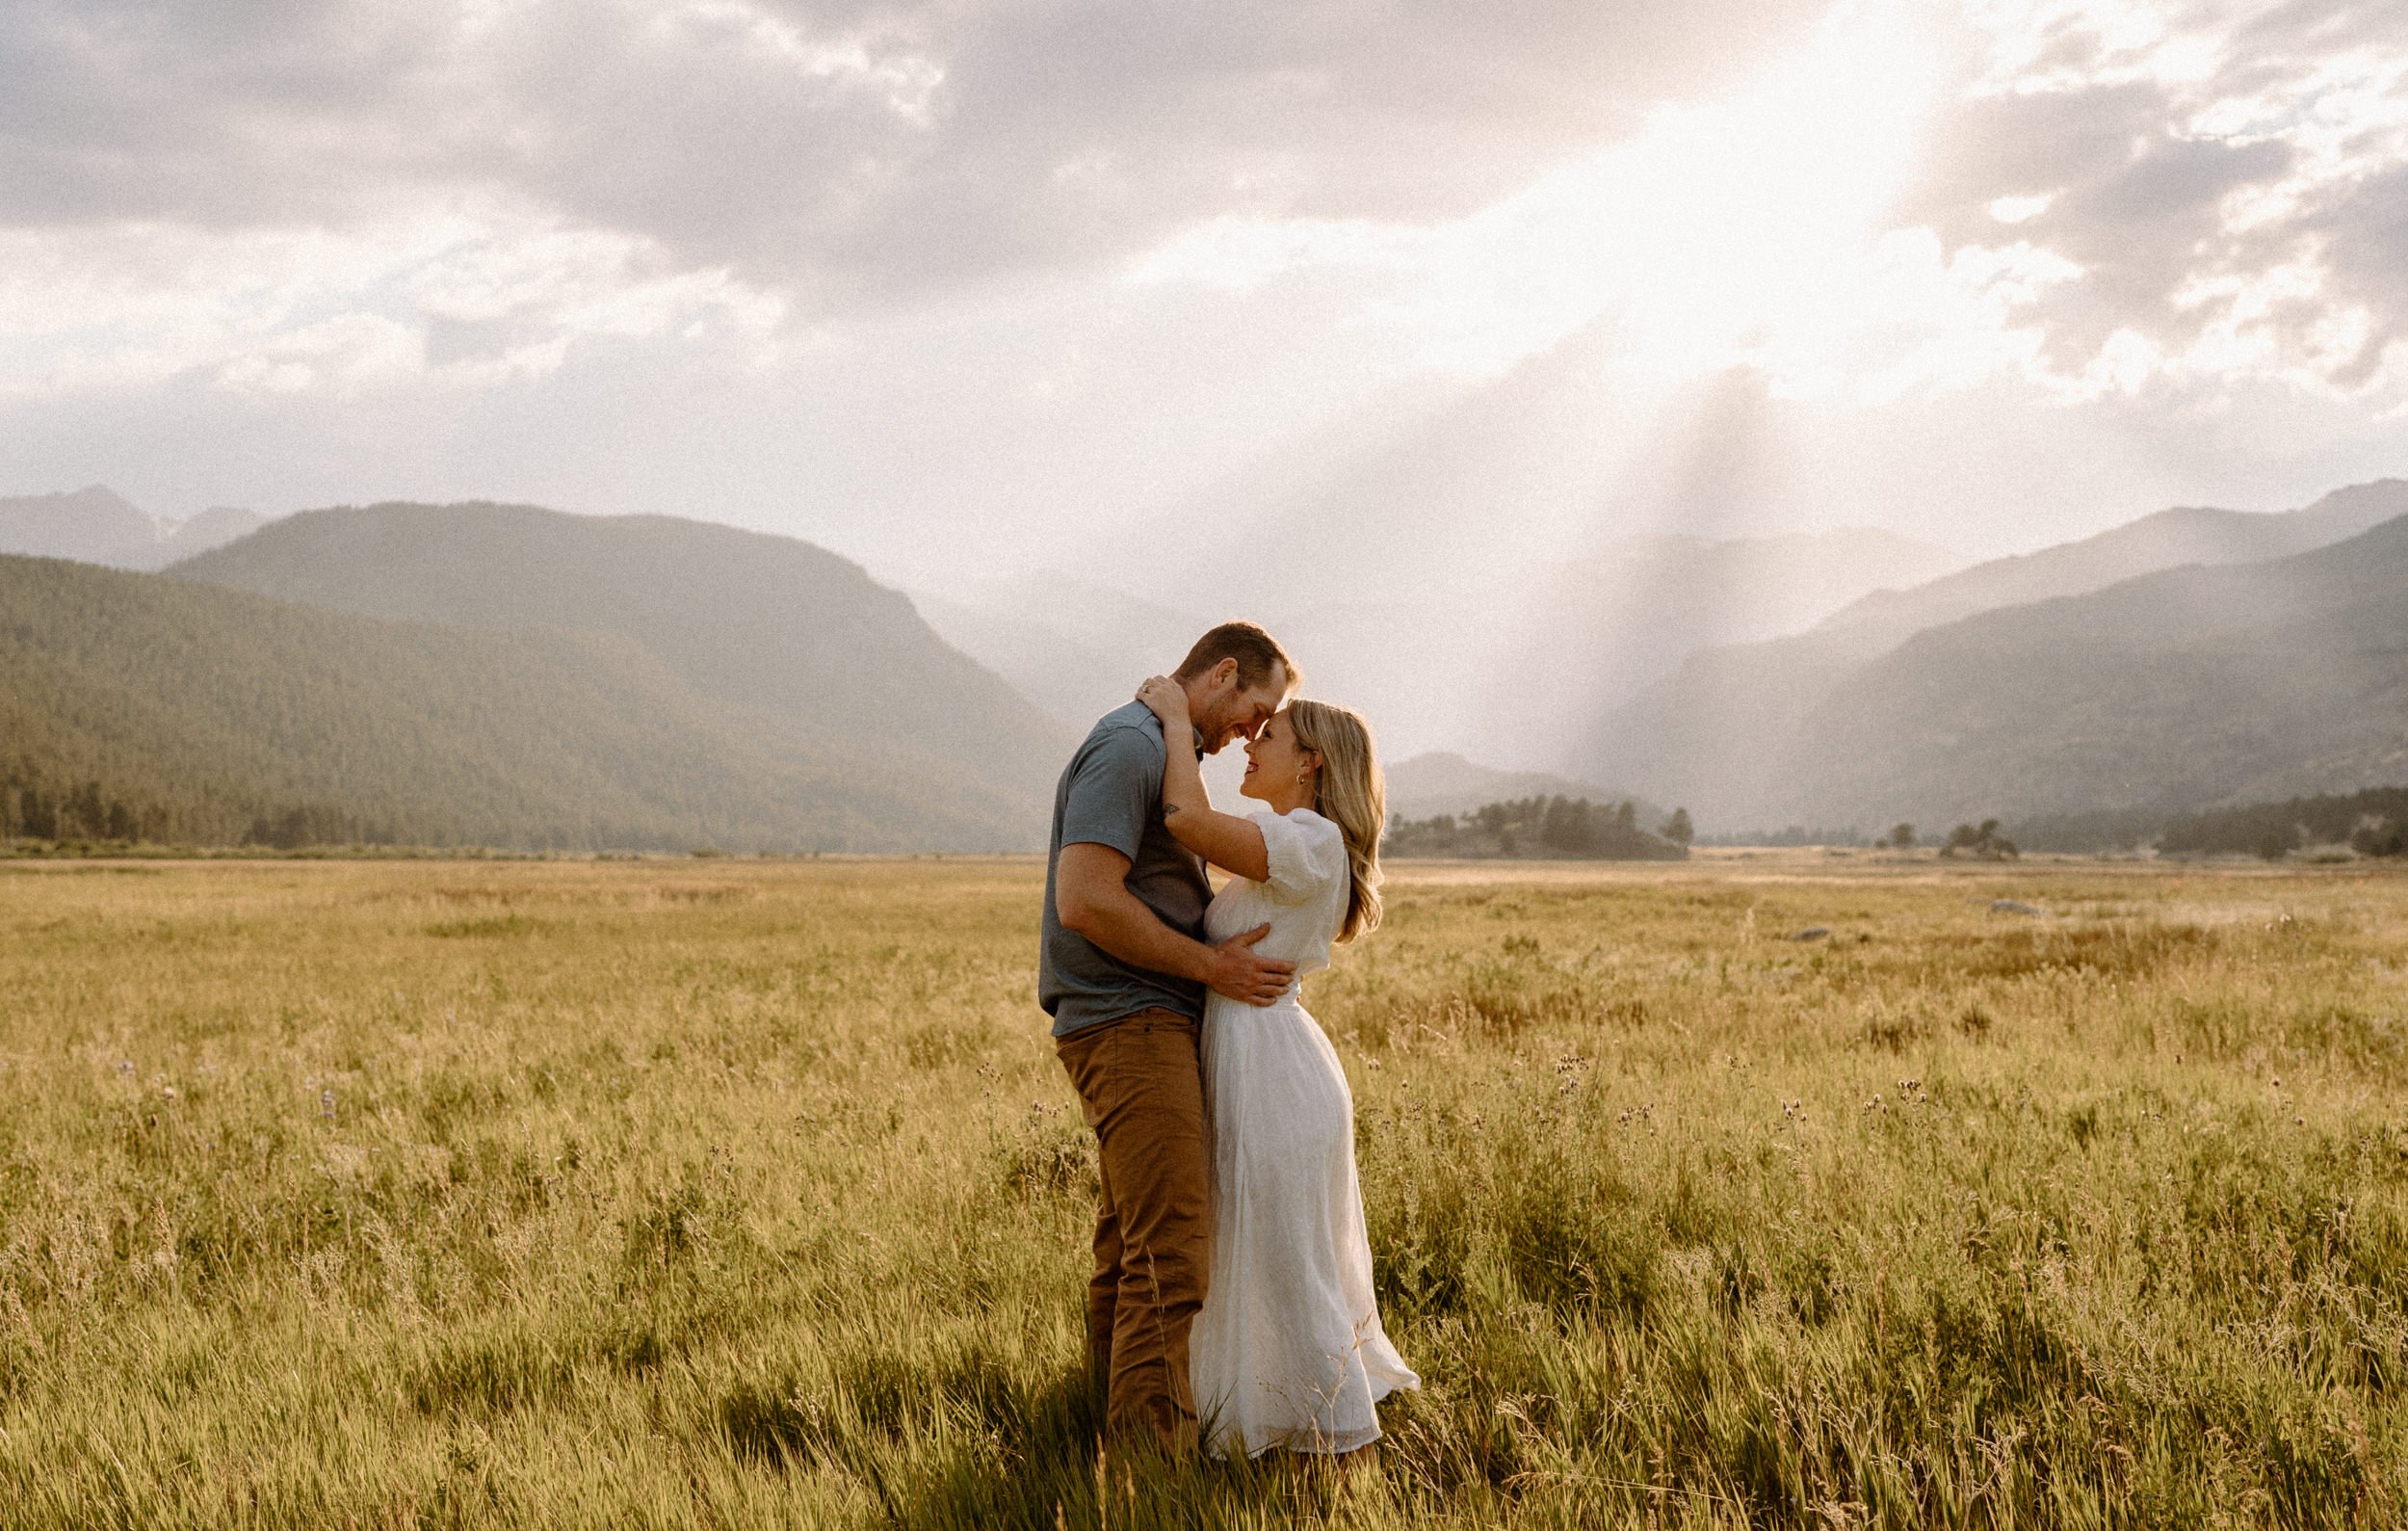 Man and woman embrace in a meadow in Rocky Mountain National Park